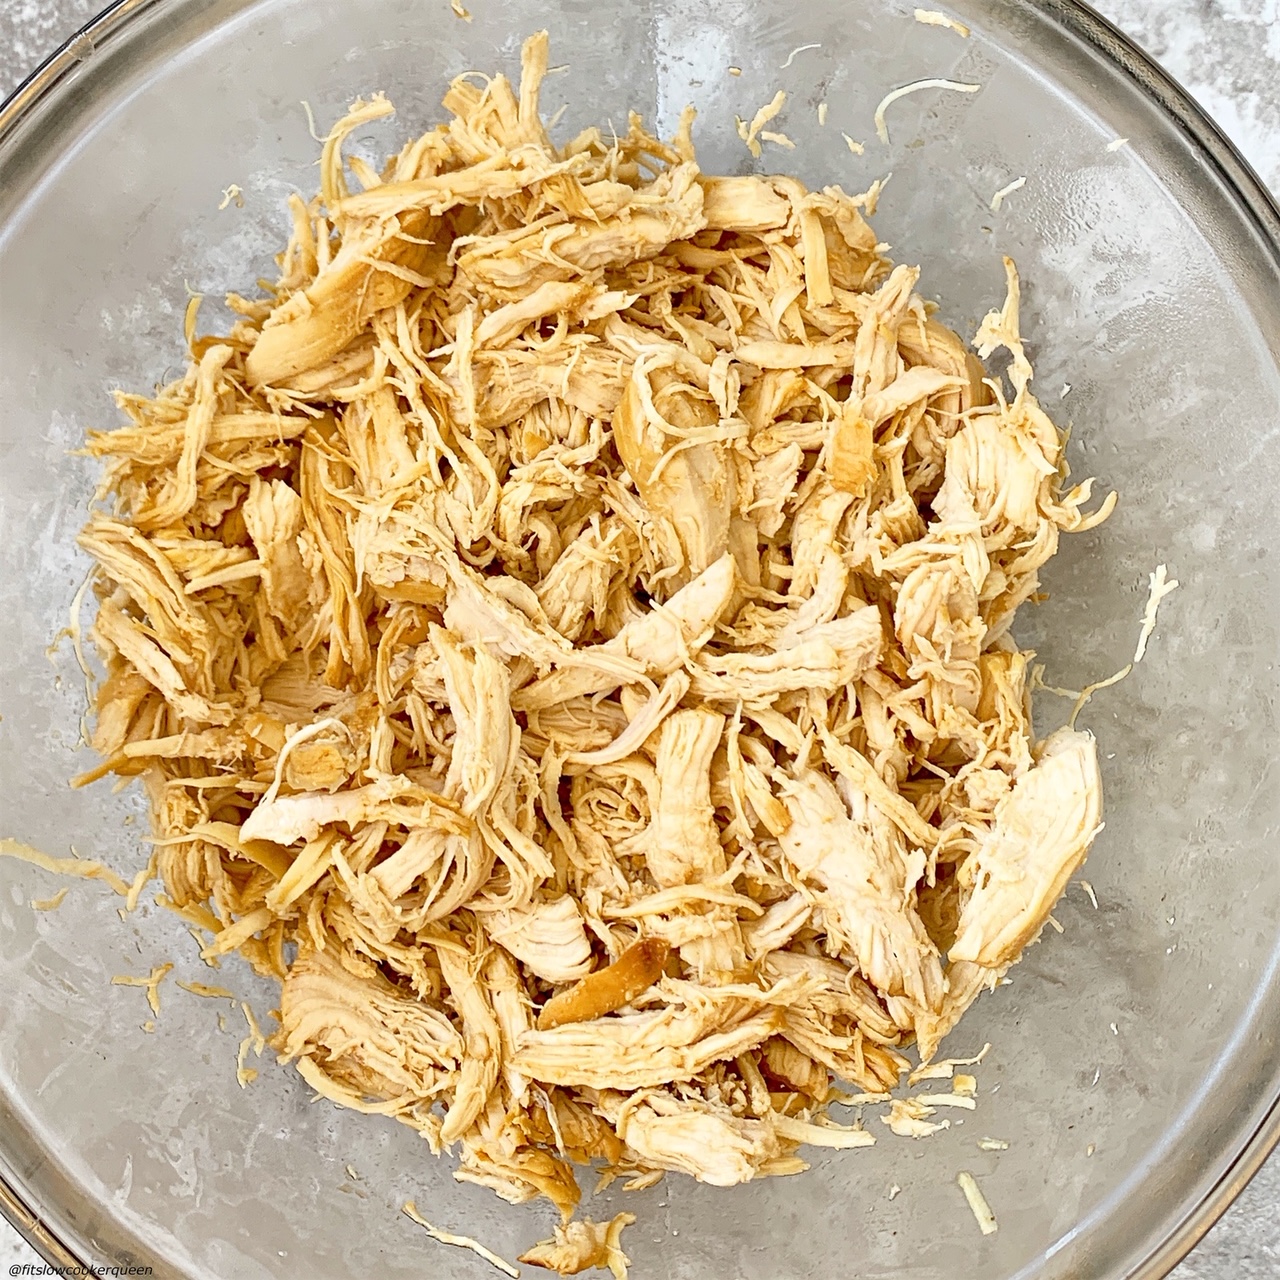 chicken shredded after being cooked in the spicy honey mustard sauce for slow cooker/instant pot spicy honey mustard chicken